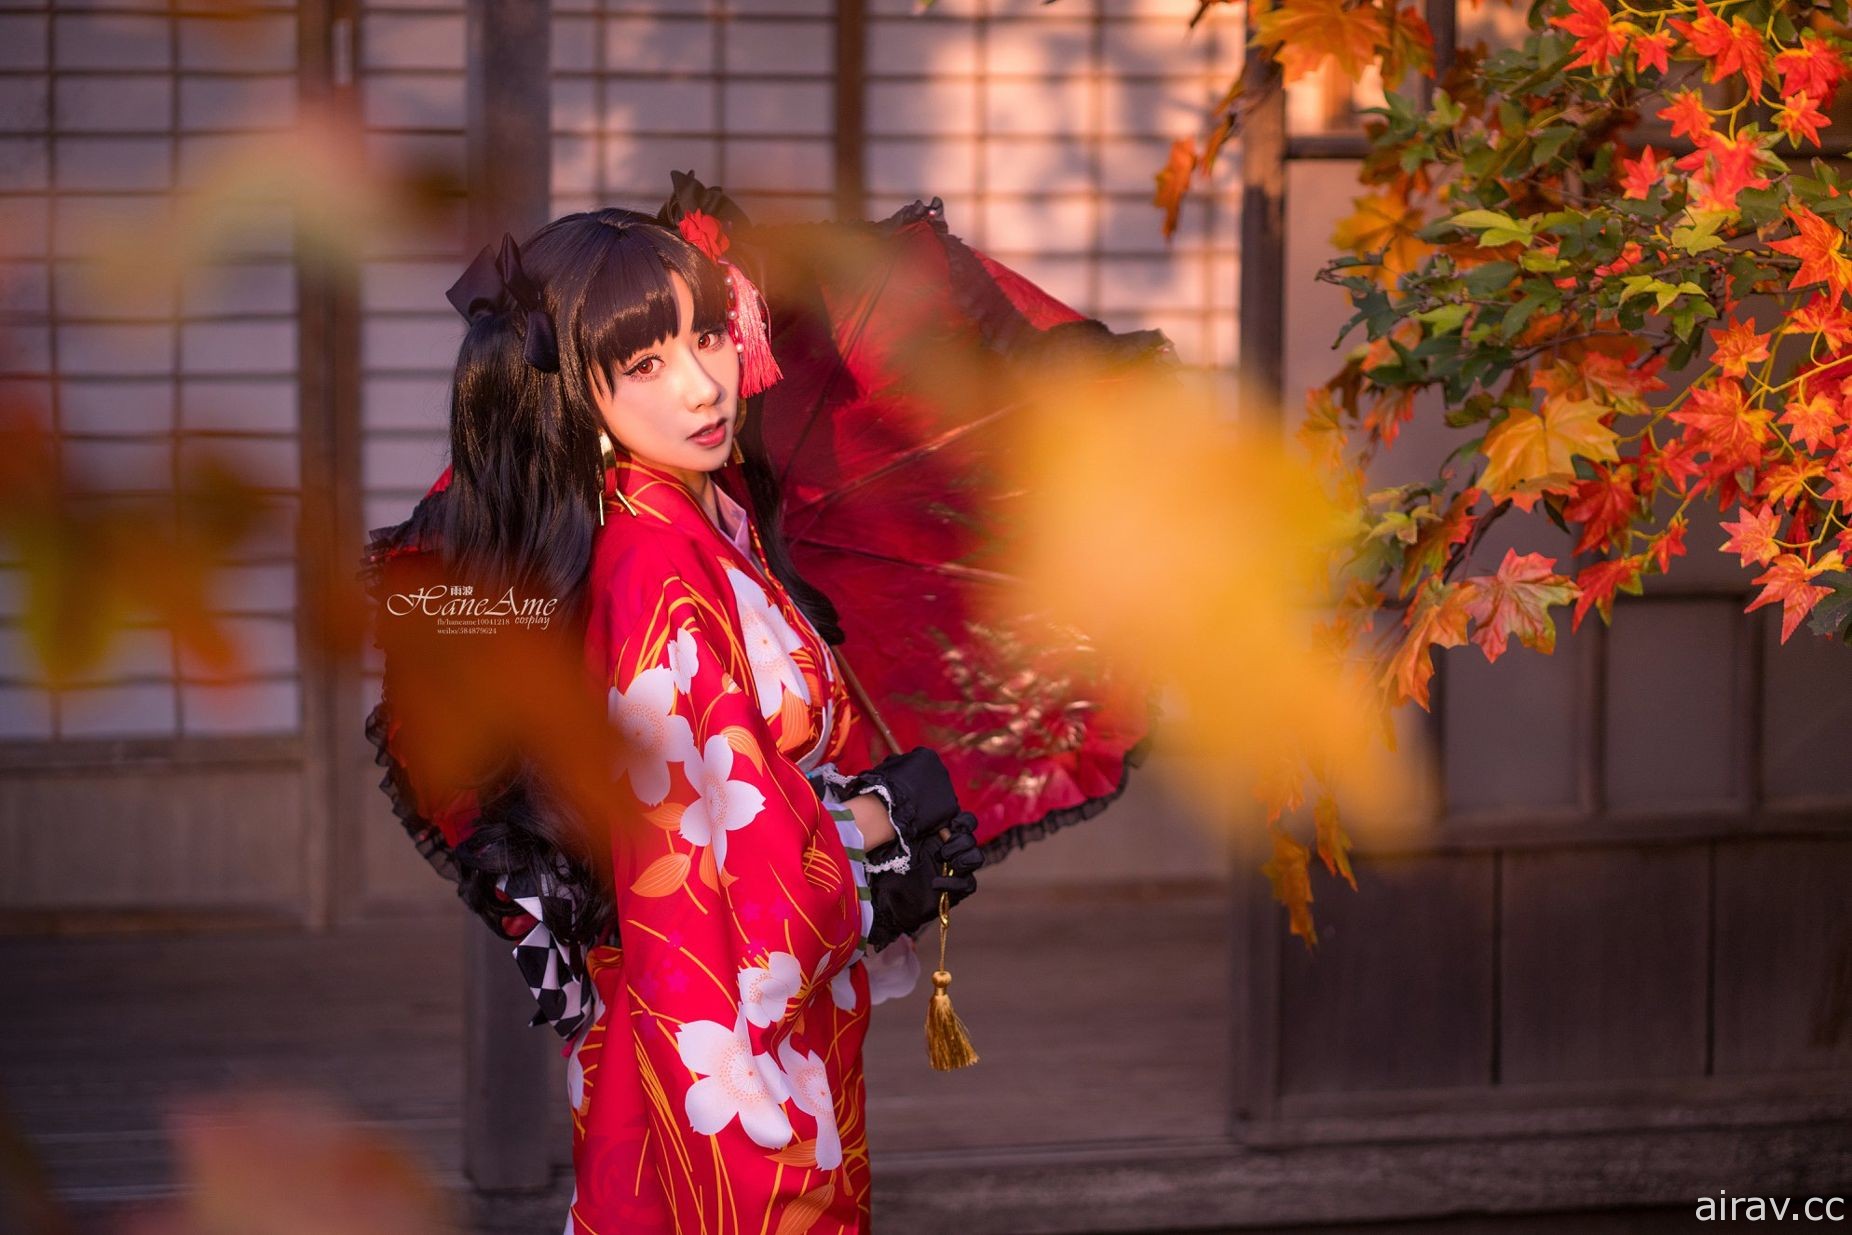 FATE grand order FGO 伊丝塔 伊斯塔 雨波HaneAme cosplay